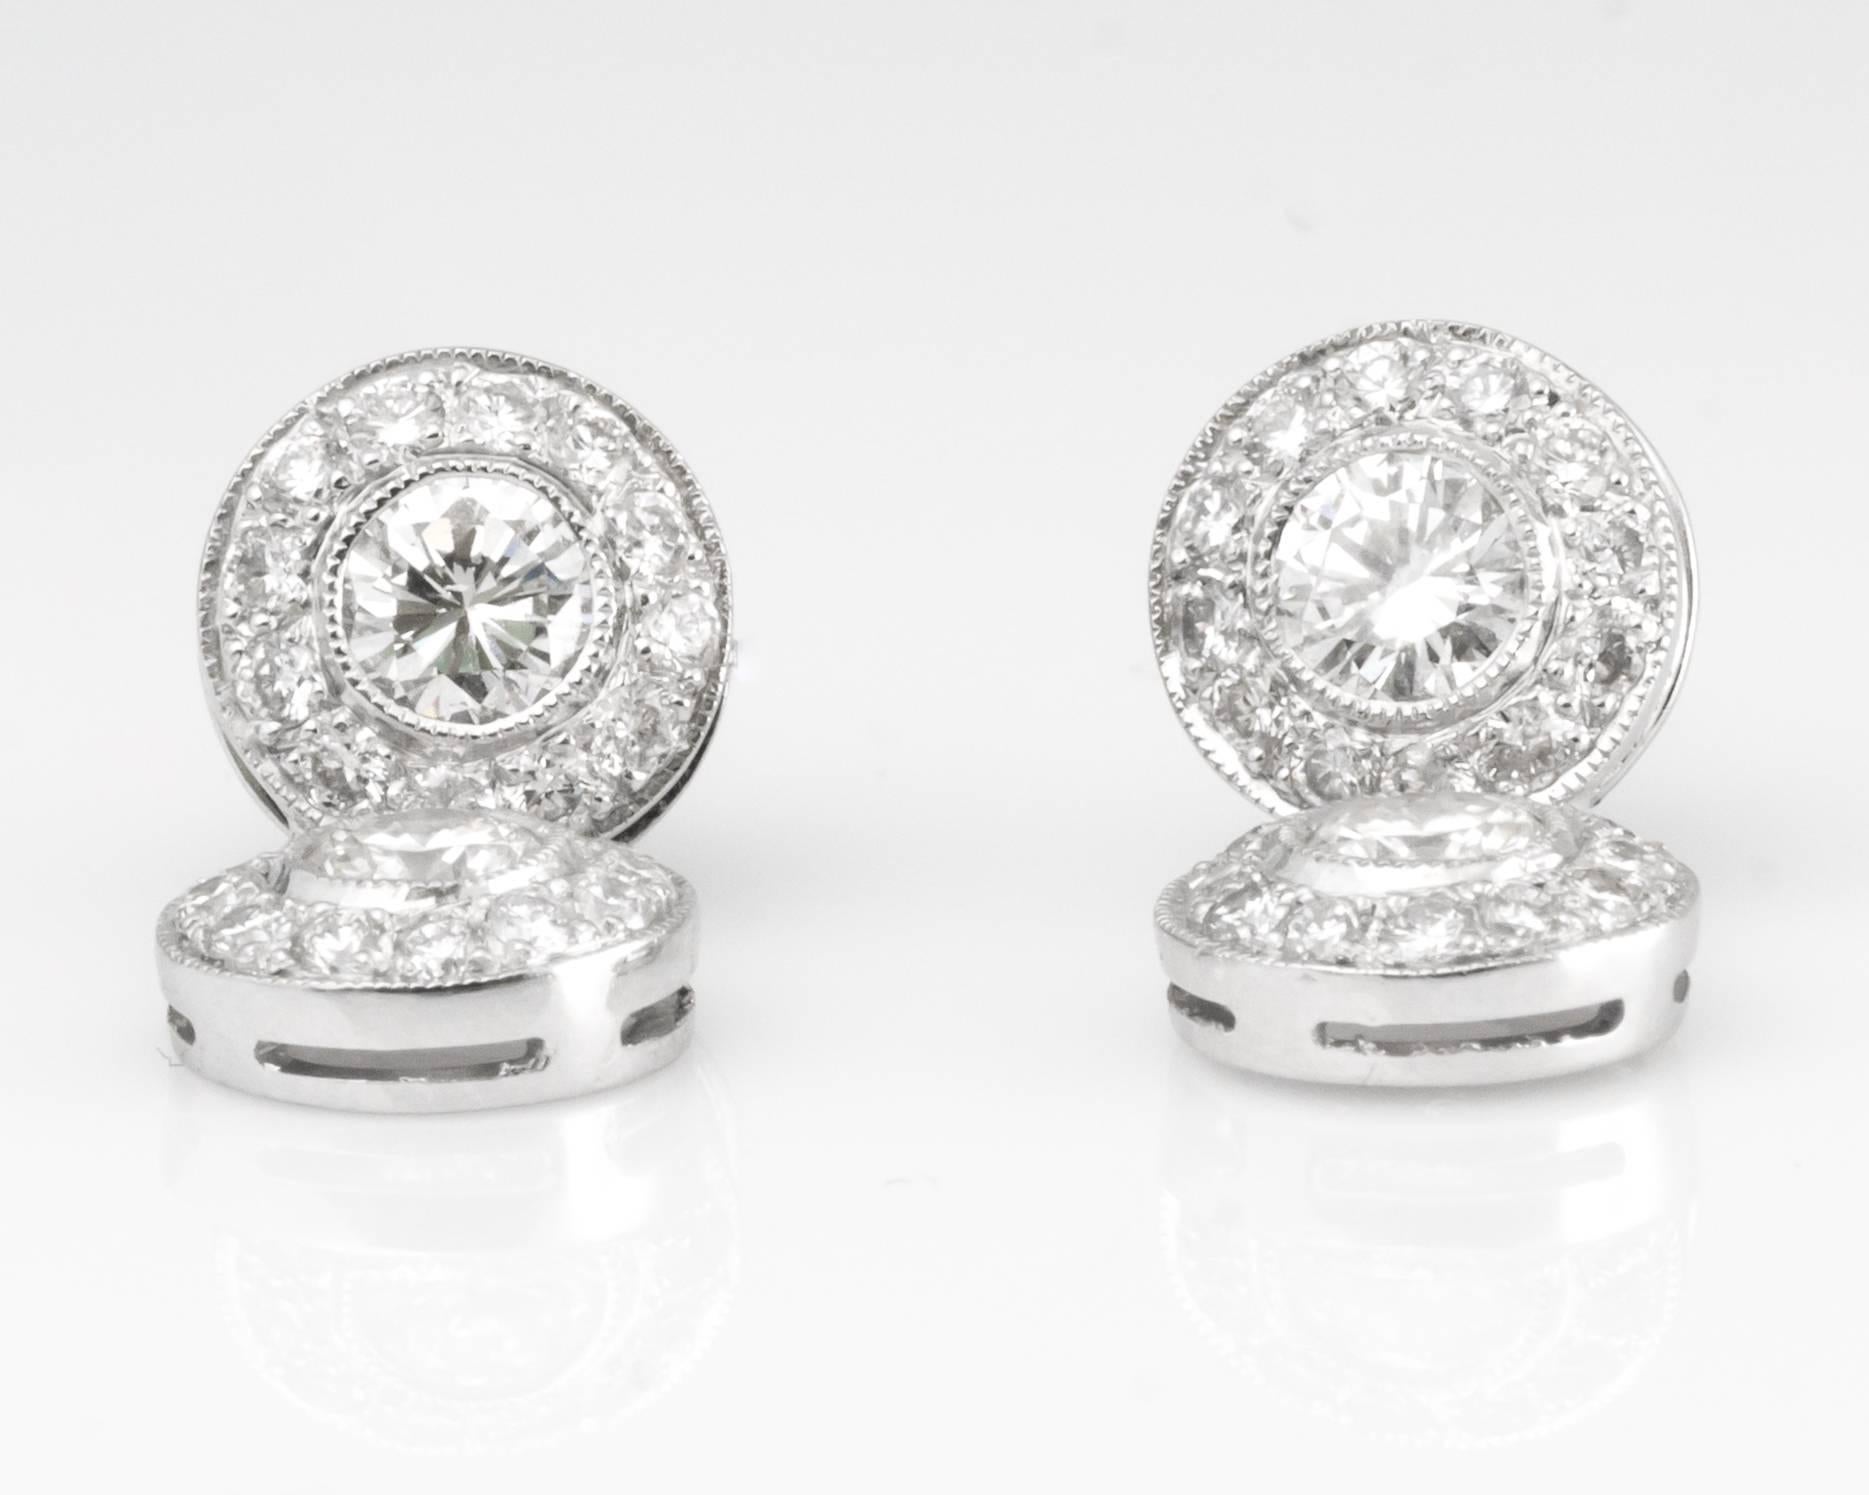 These spectacular Diamond Drop earrings are just waiting to be taken out and shown off! Each earring features 2 bezel set center diamonds surrounded by a halo of accent diamonds set in 14 karat white gold. These post earrings have push backs for